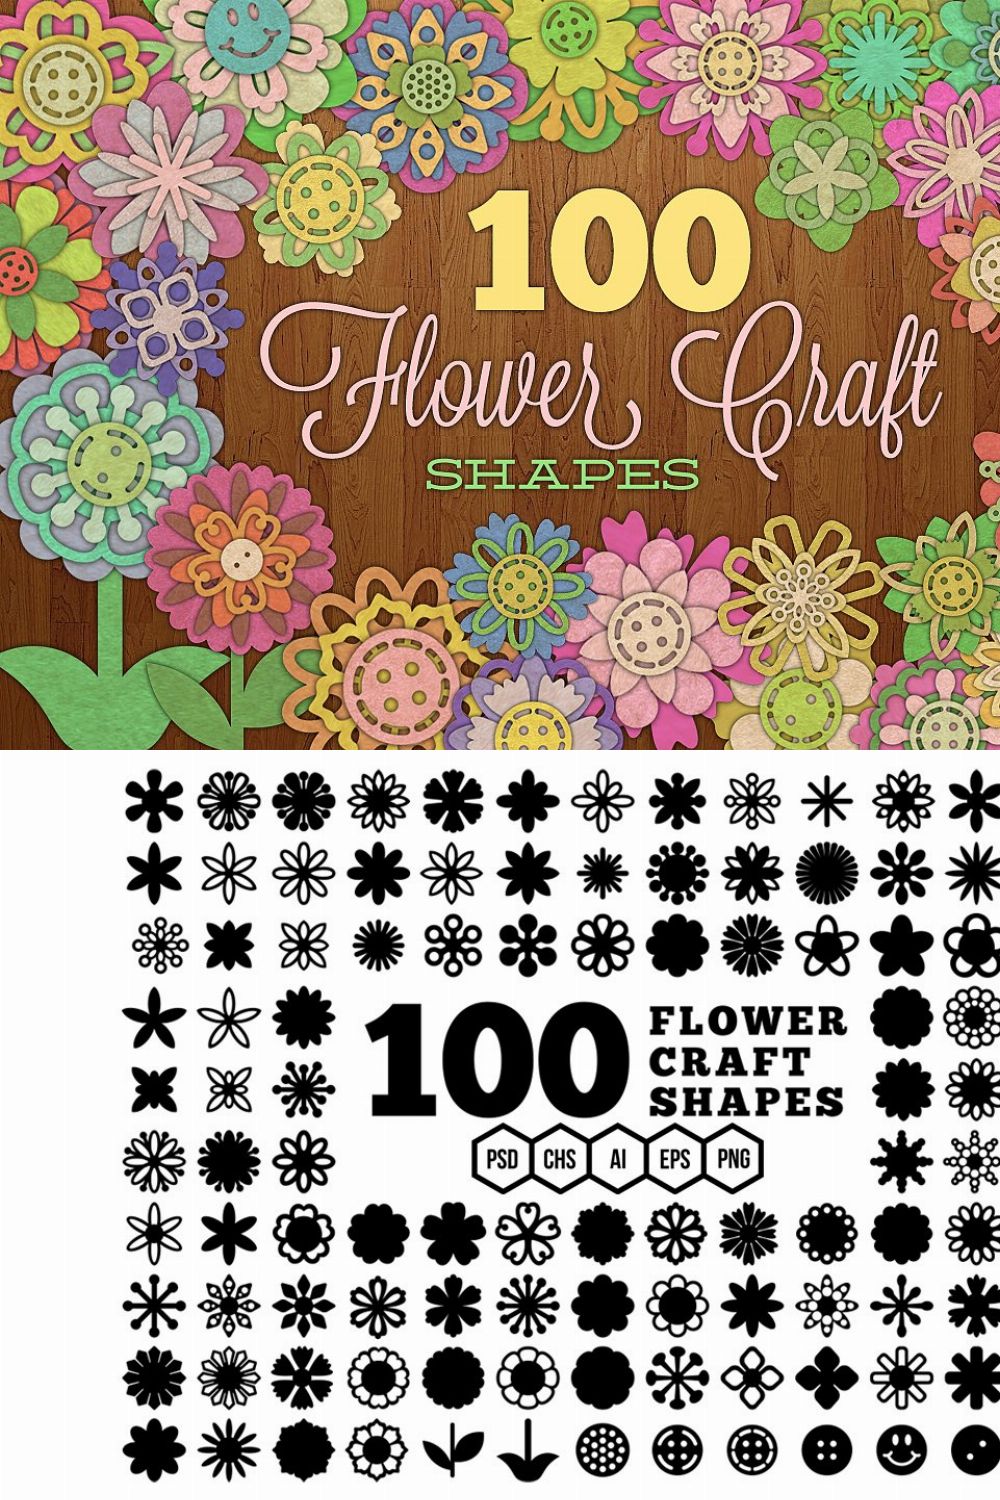 100 Flower Craft Shapes pinterest preview image.